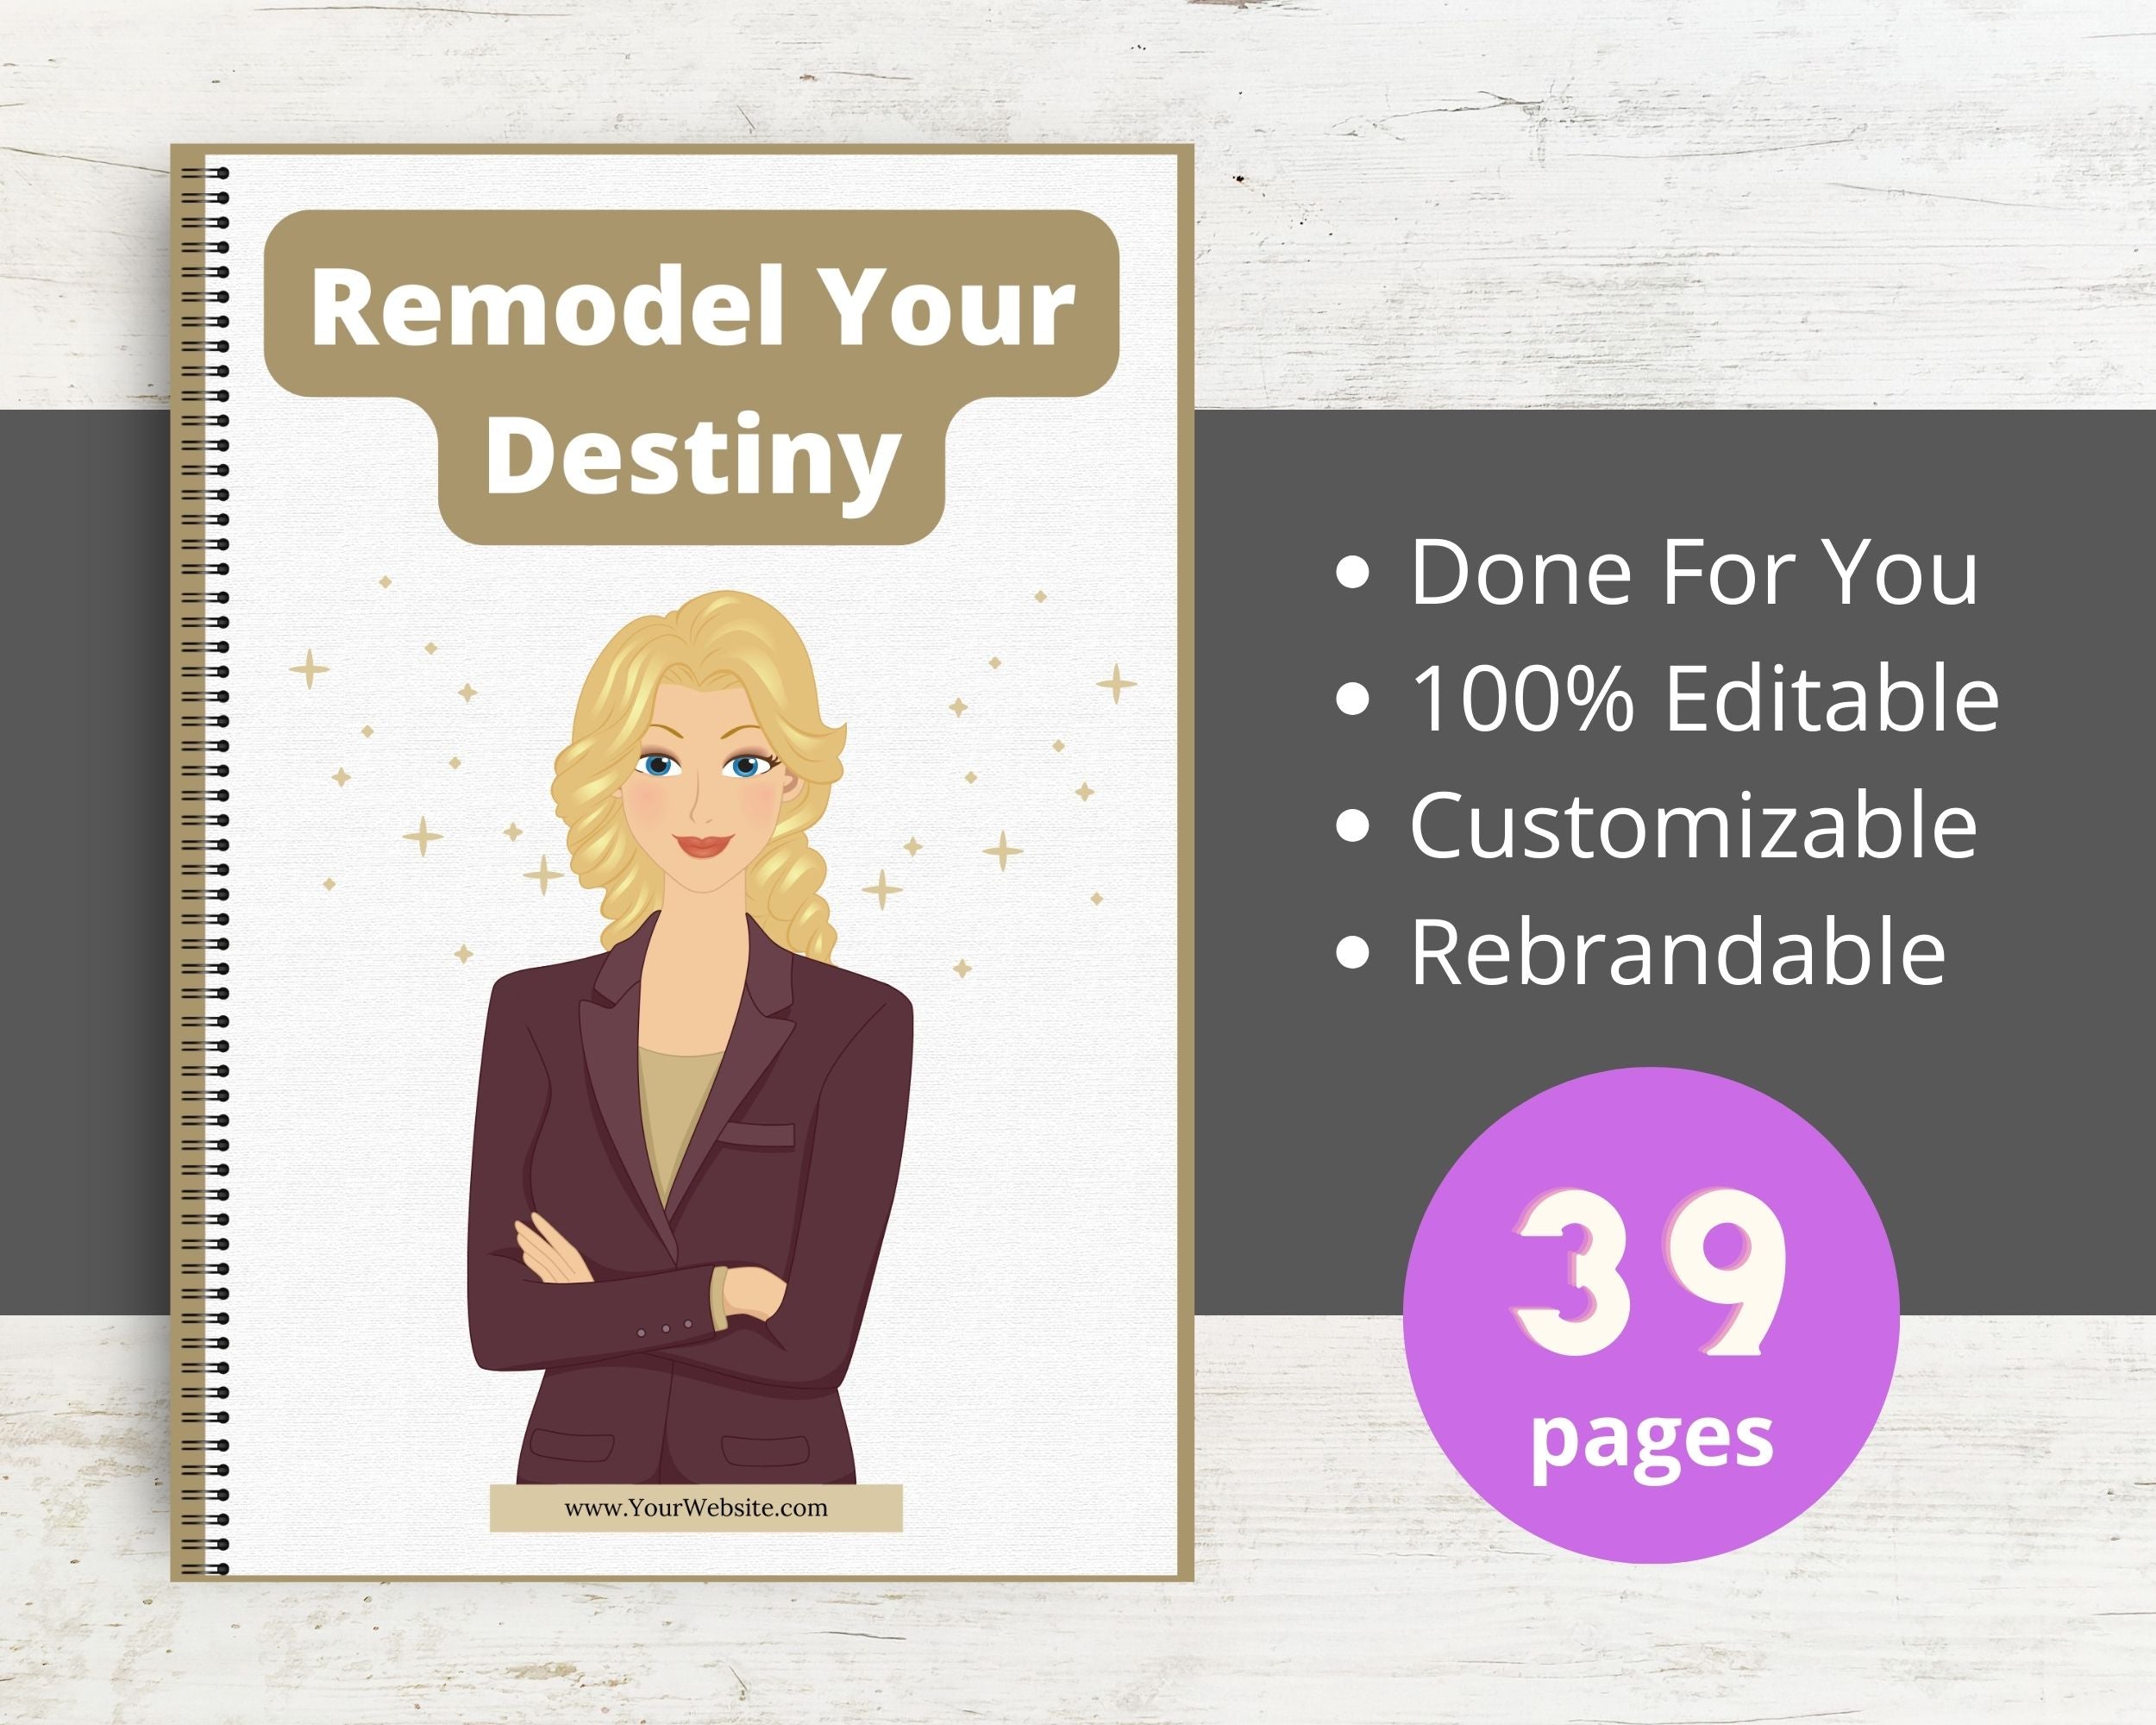 Editable Remodel Your Destiny Ebook | Done-for-You Ebook in Canva | Rebrandable and Resizable Canva Template